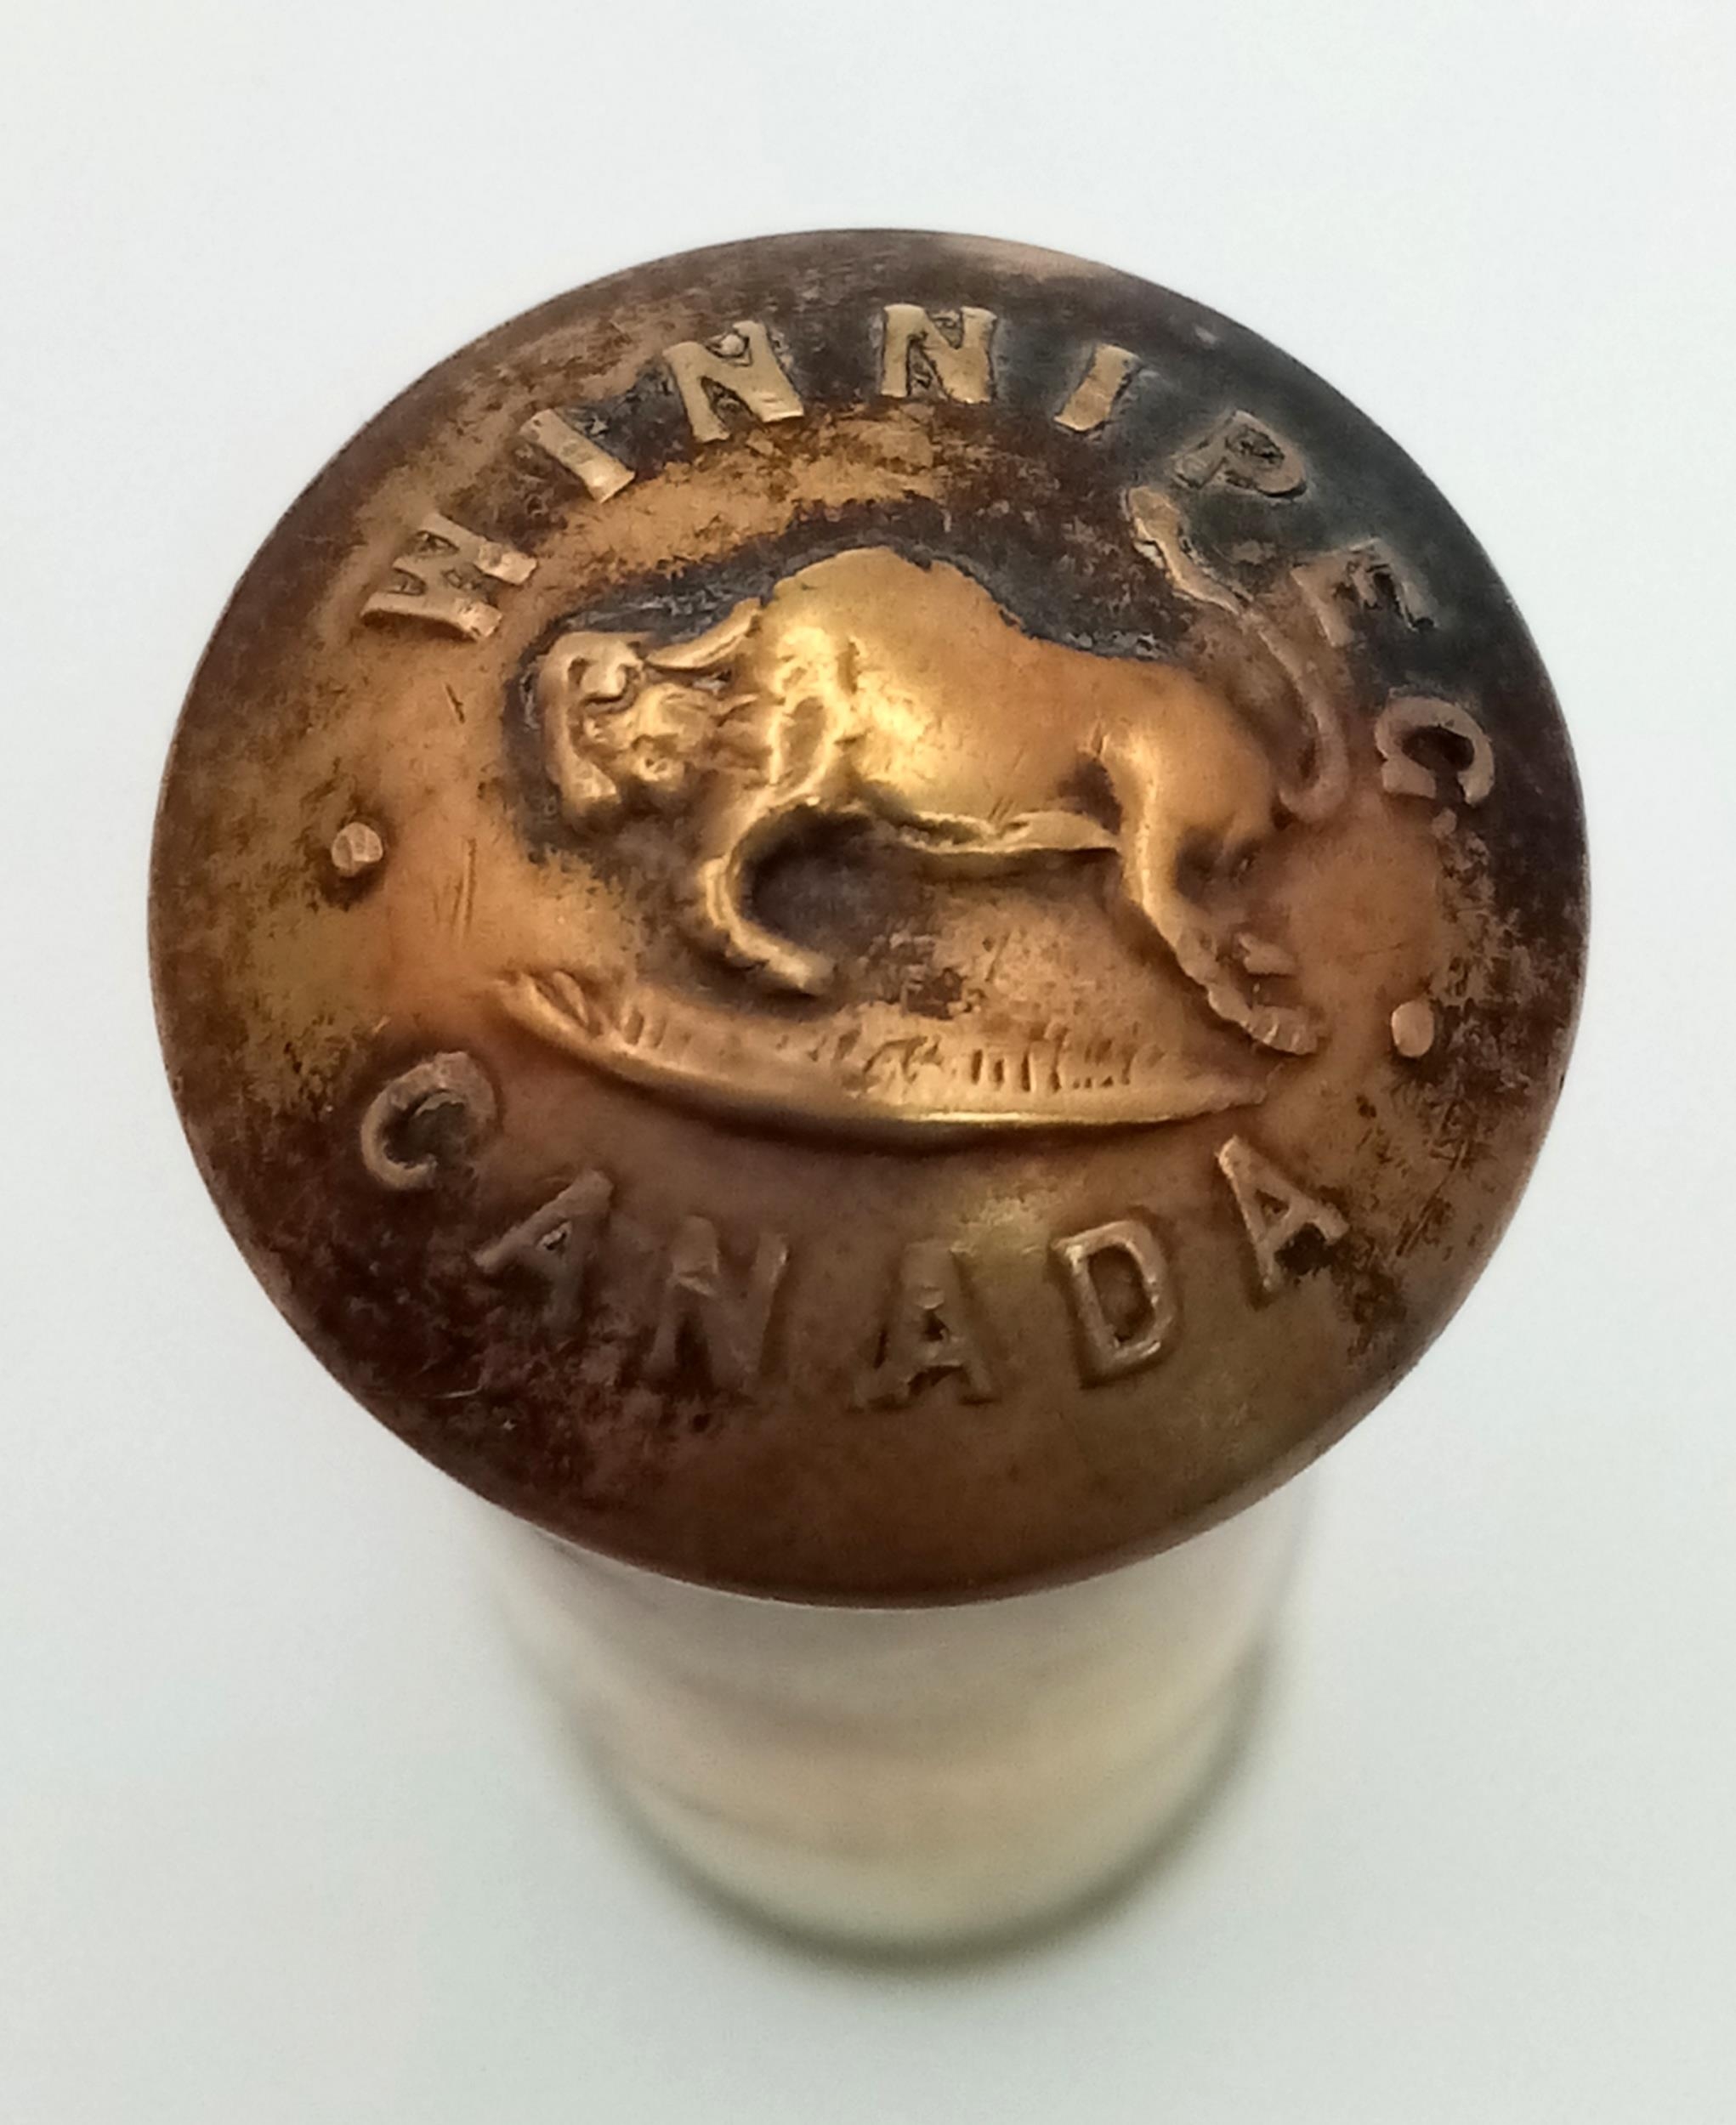 A real rare “Been There” WW1 Trench Art Lighter with a button from the Canadian 27th Battalion - Image 4 of 4